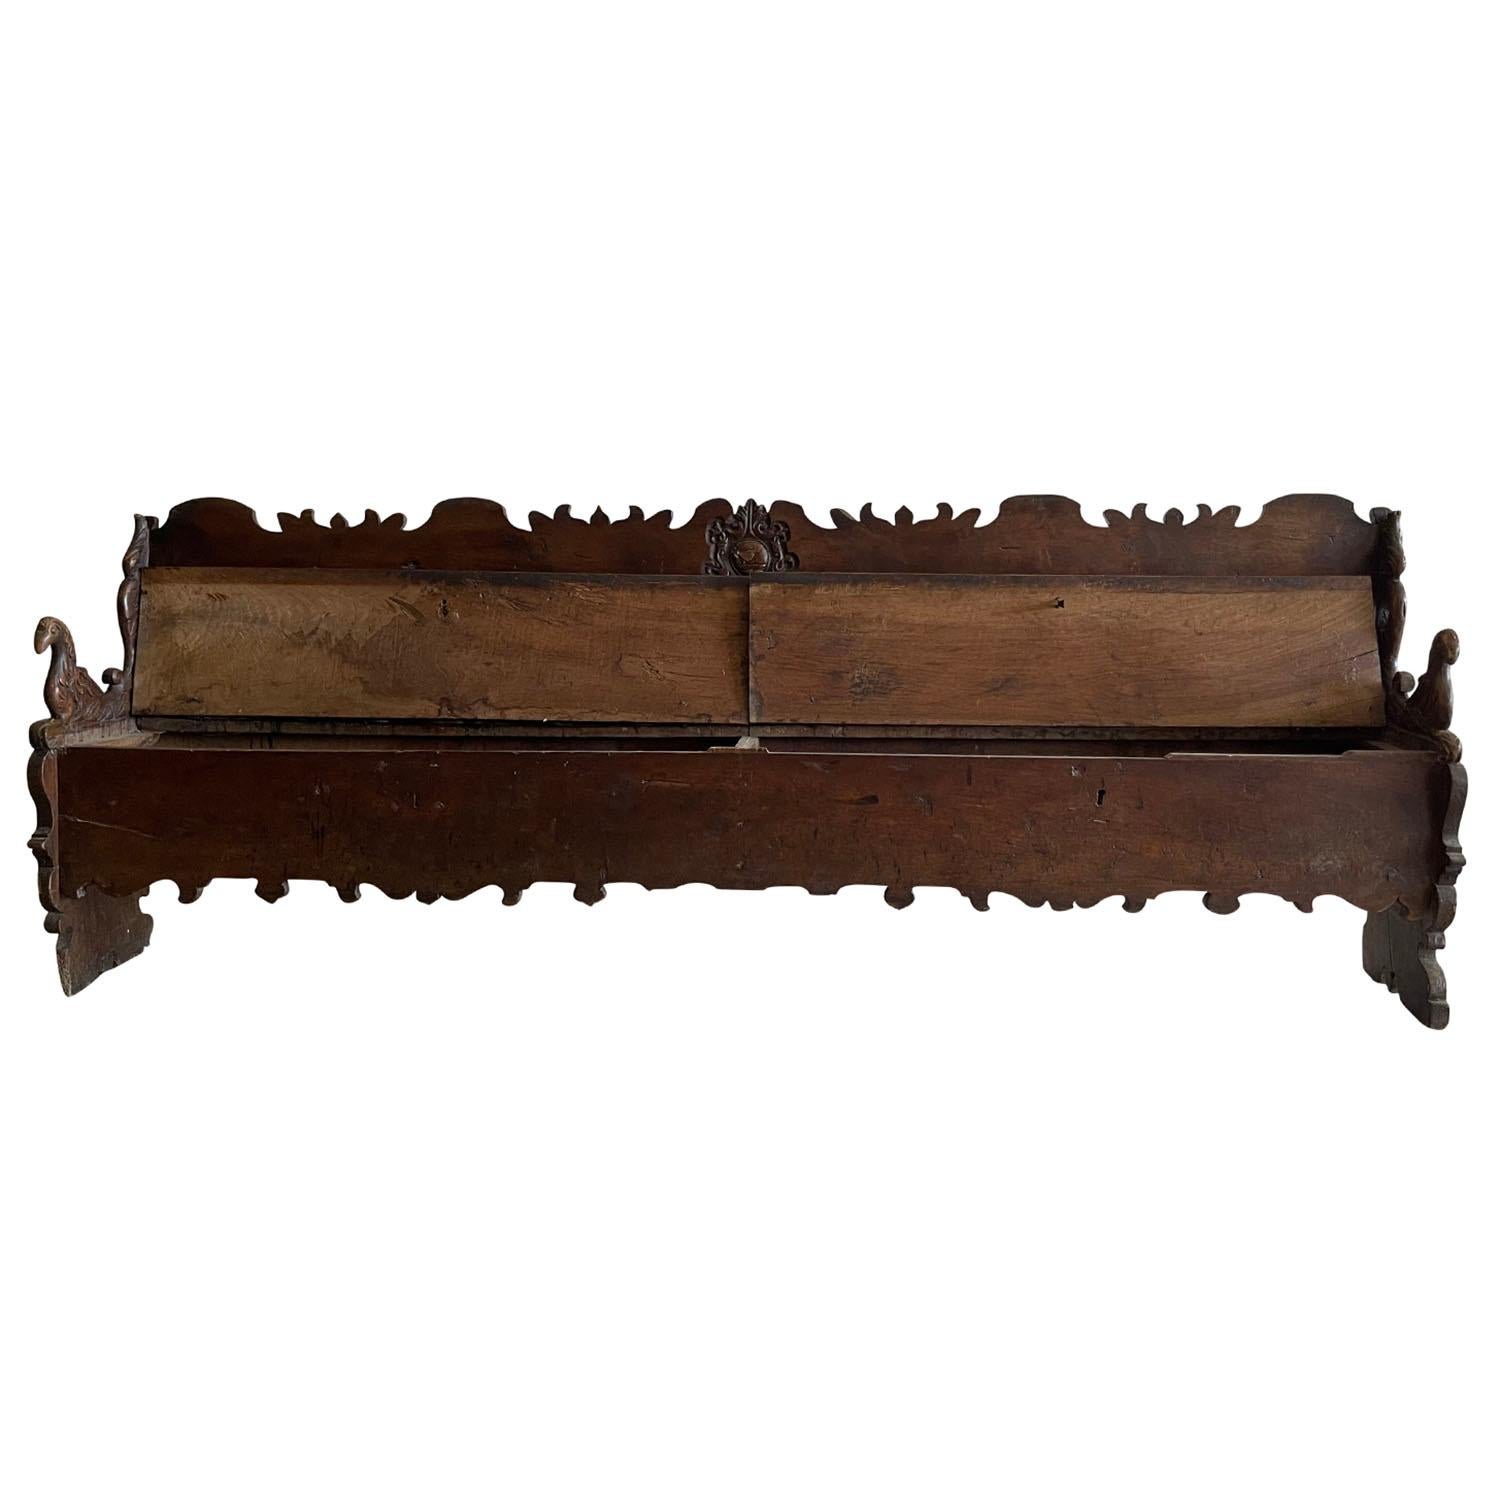 18th century late Renaissance, an antique, impressive Tuscan hand carved Walnut Cassapanca or storage bench with scrolled armrests depicting a pigeon design and Acanthus leaves, in good condition. The backrest is carved with very detailed ornaments